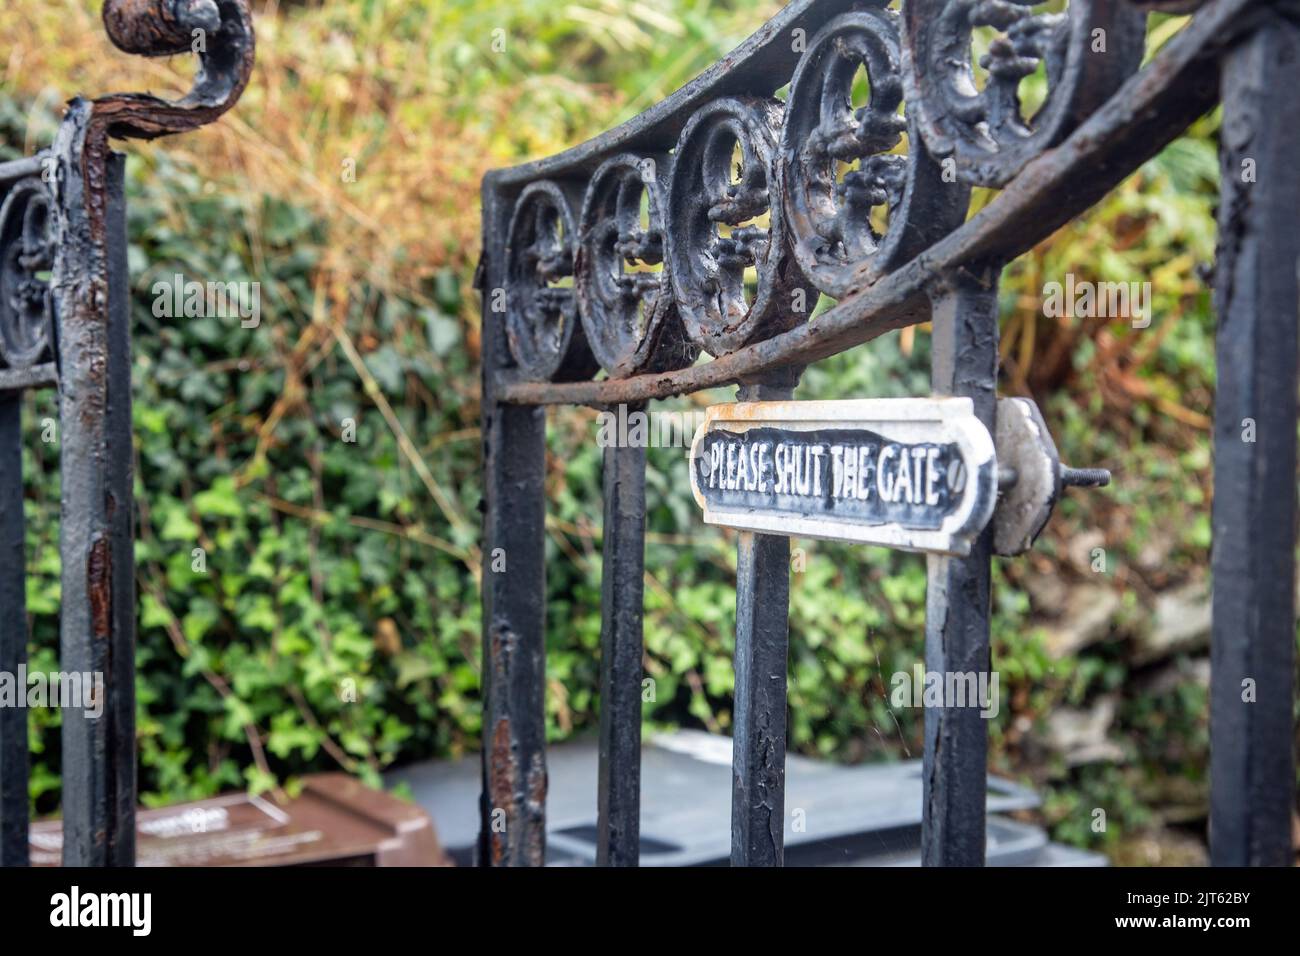 An old rusted iron gate with a notice reading please shut the gate, has been left ajar Stock Photo